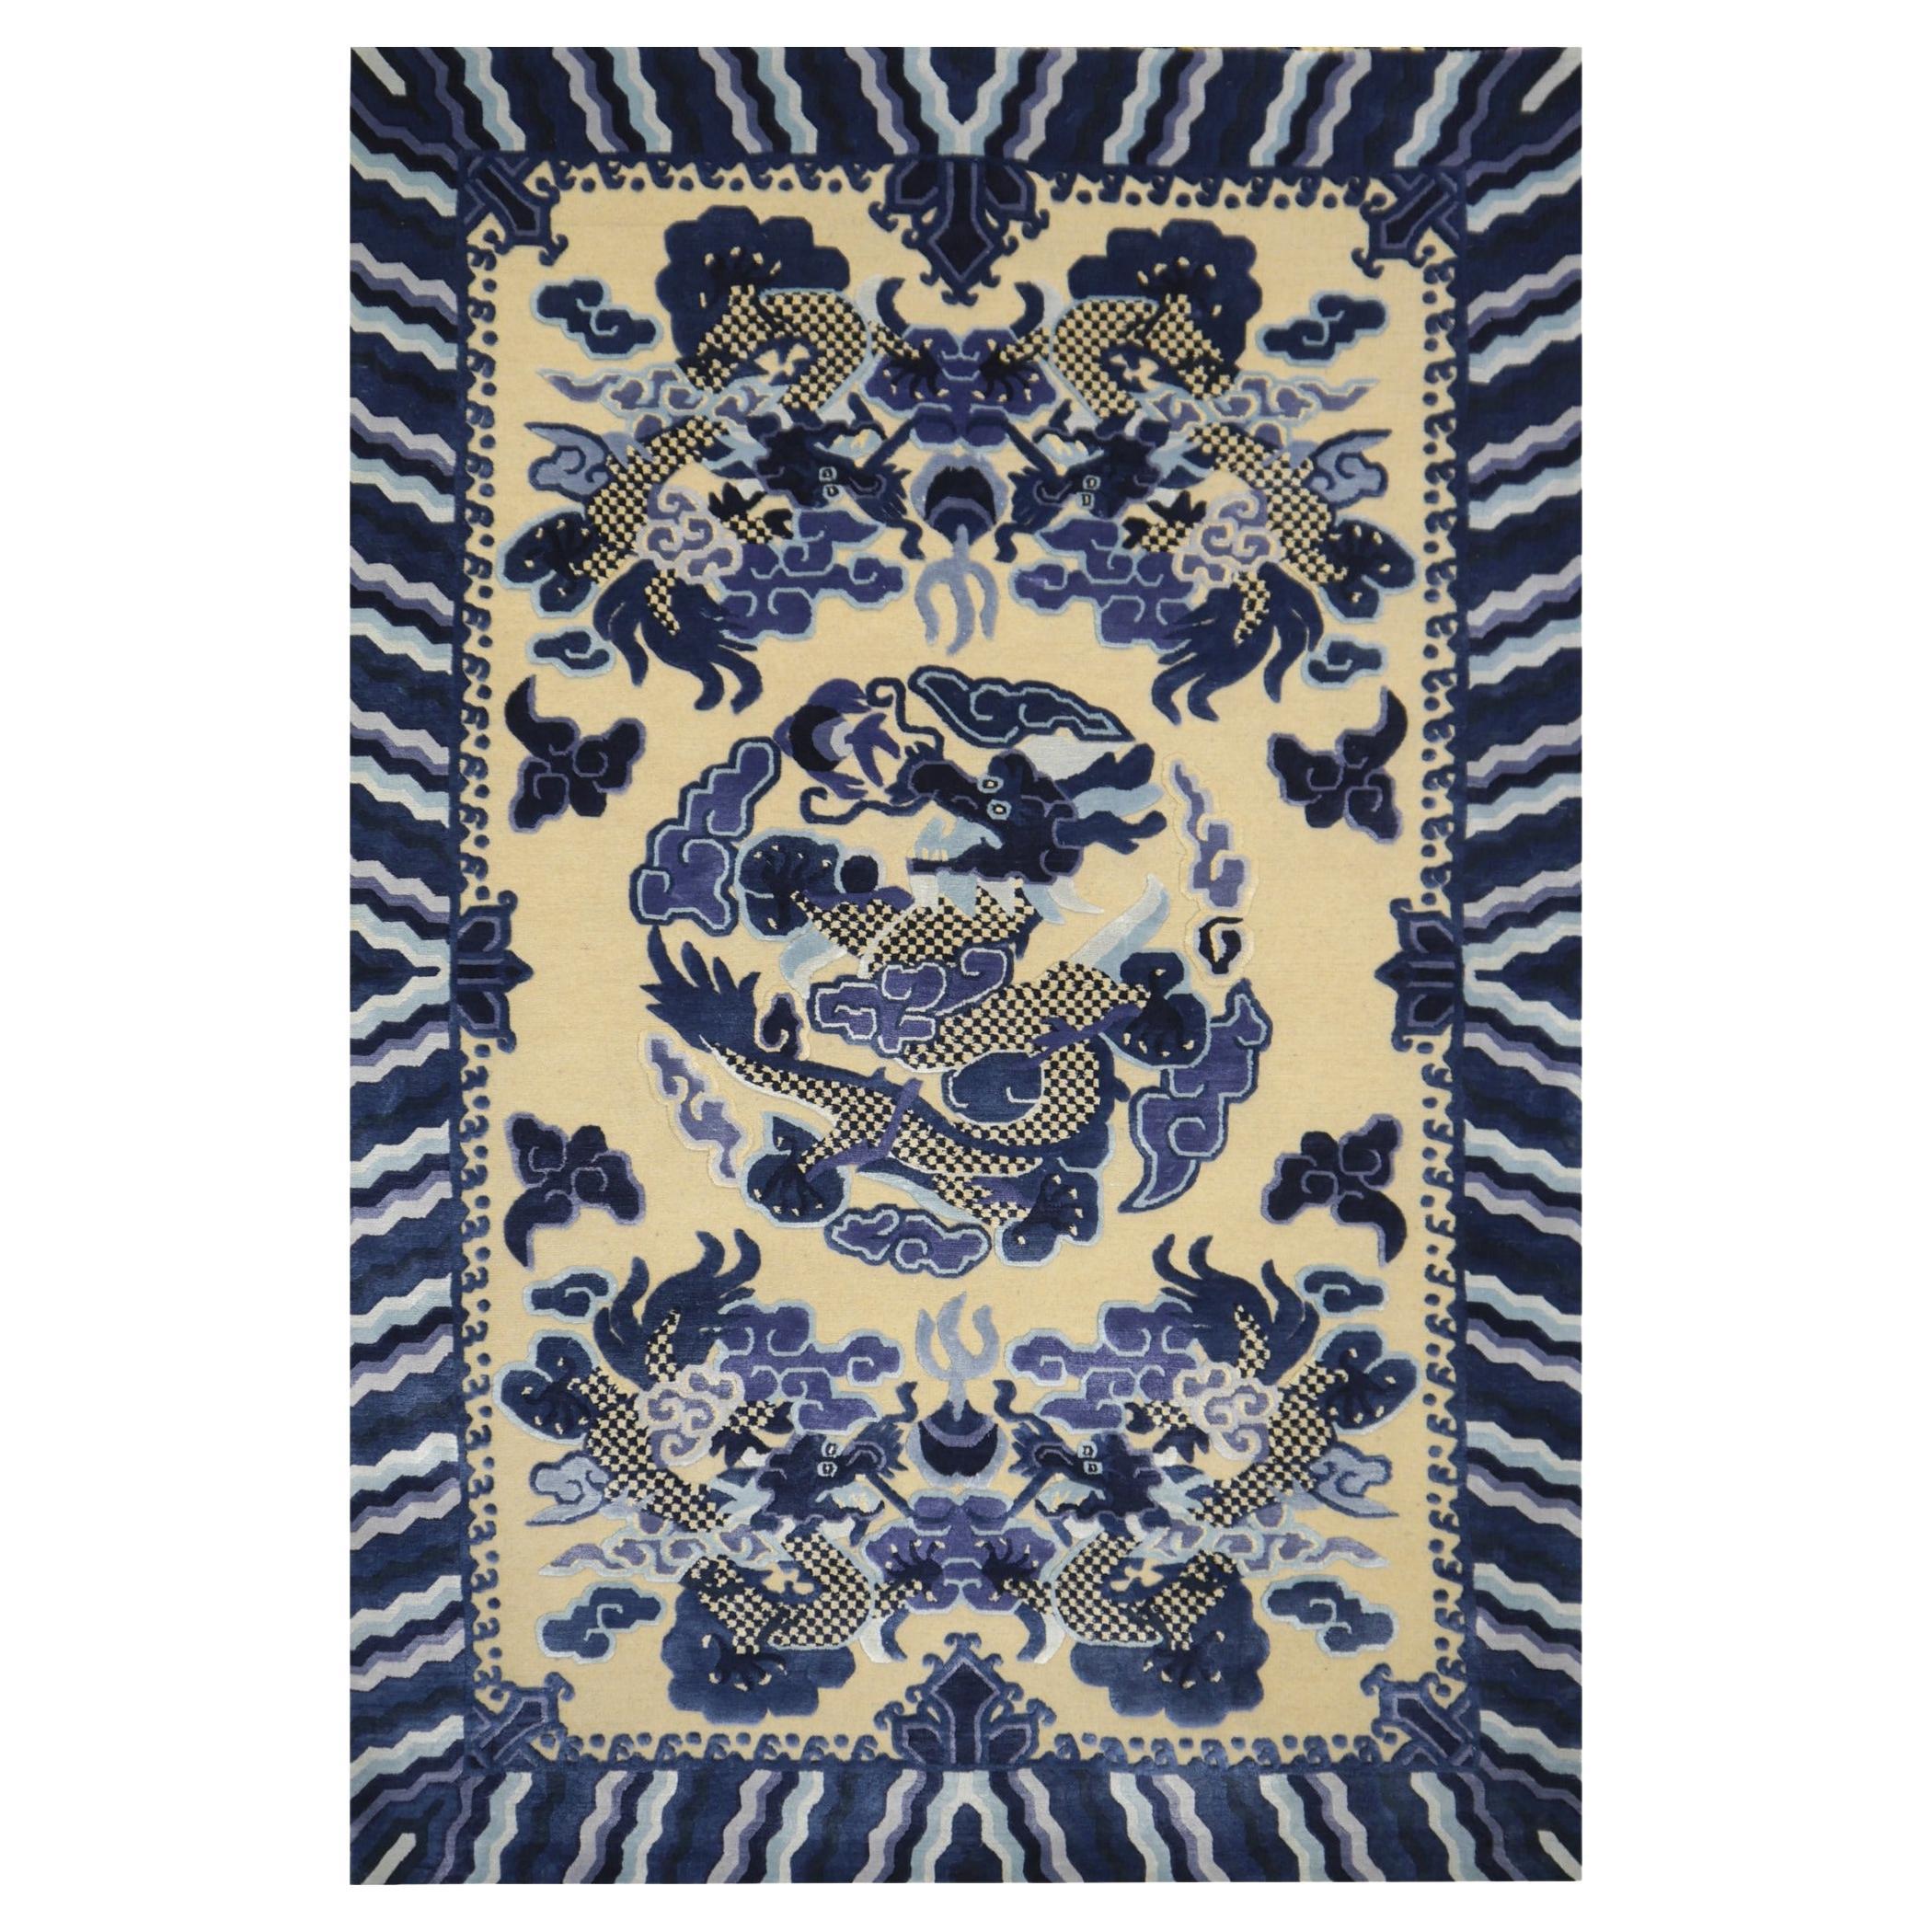 Dragon Rug Wool Silk Style Chinese Imperial Carpet Blue Beige, Djoharian Design For Sale